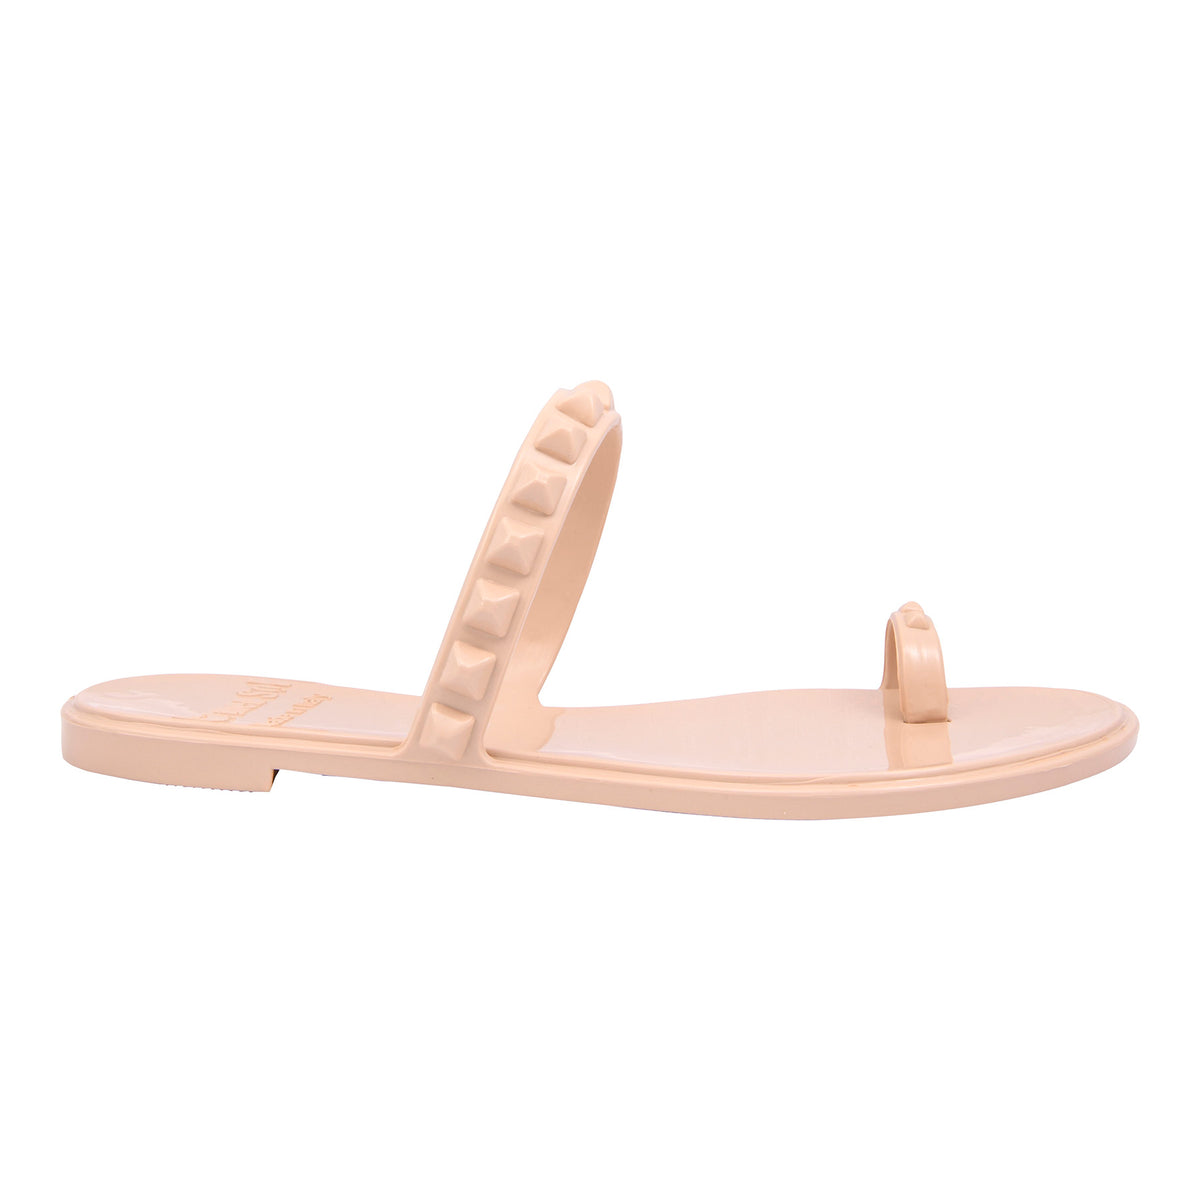 Maria beach slide sandals from Carmen Sol with studs in color blush